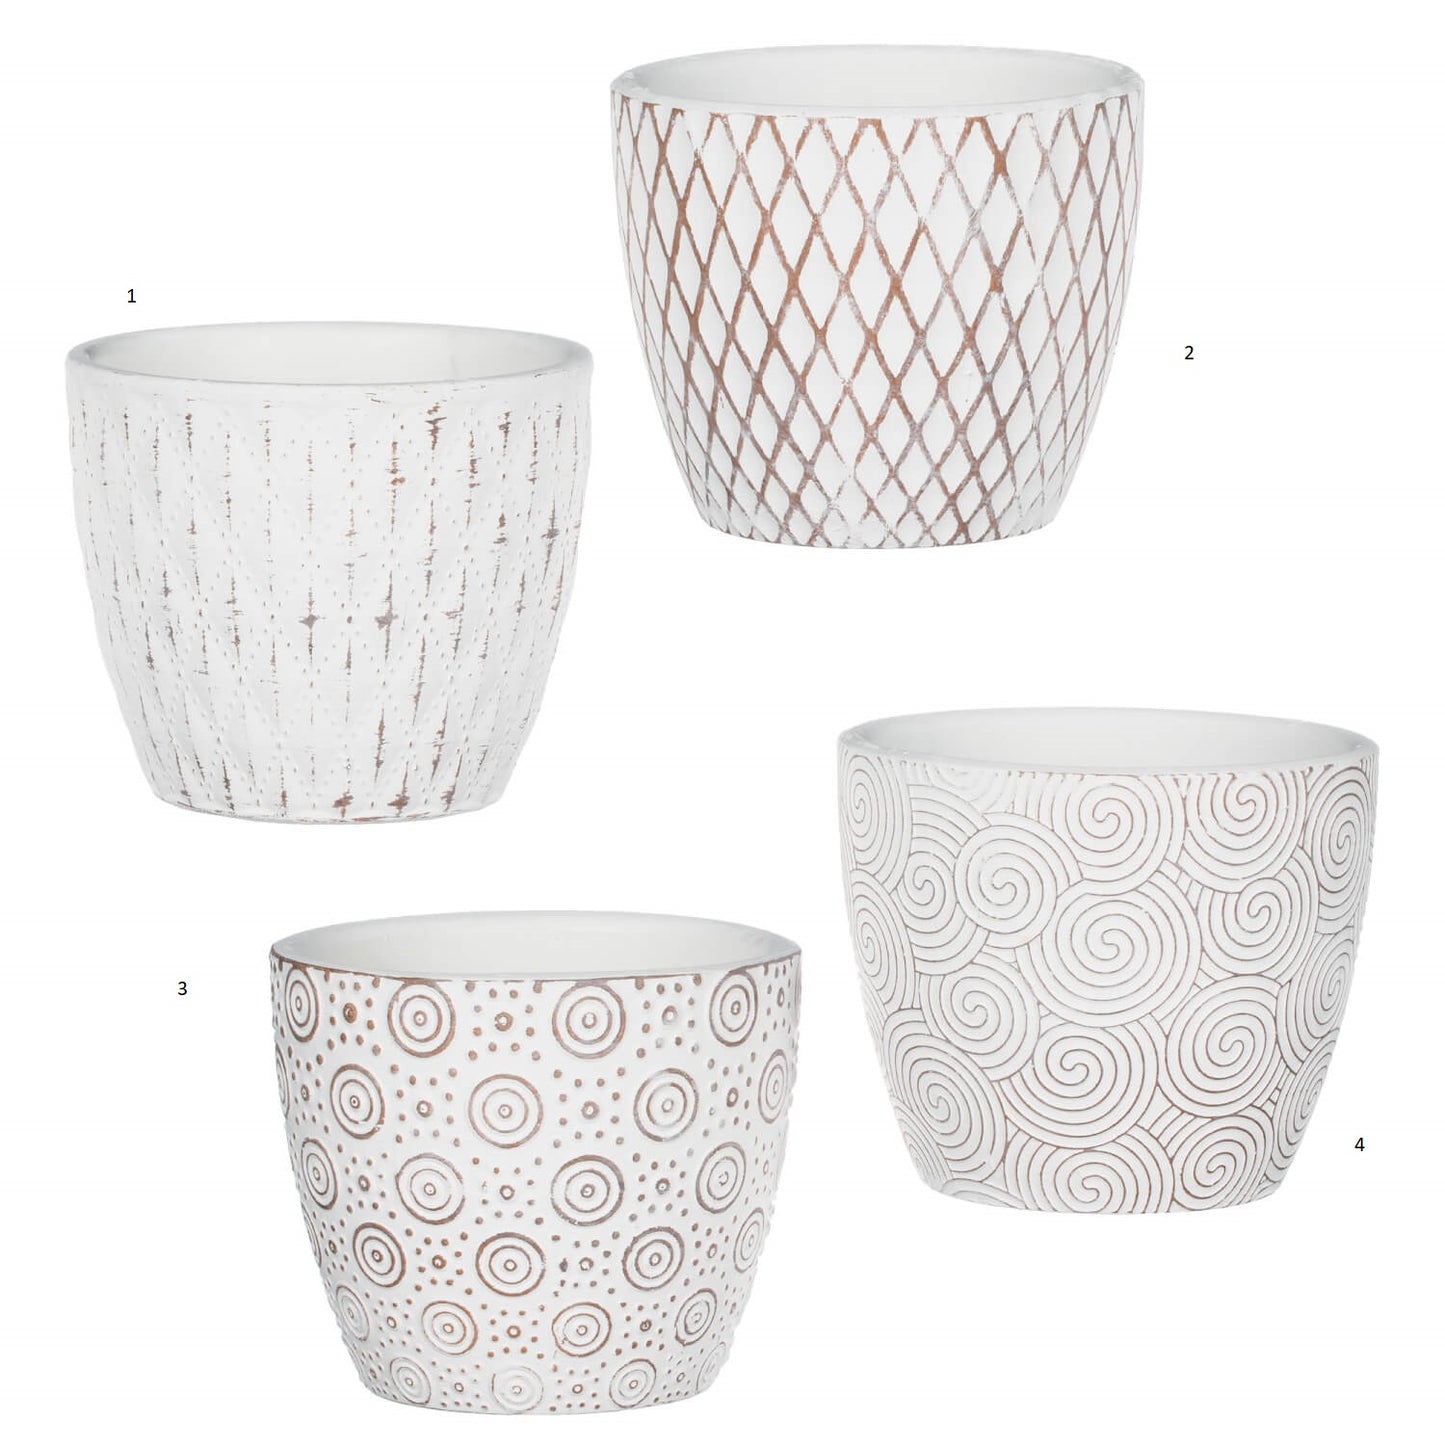 Small White Textured Planters